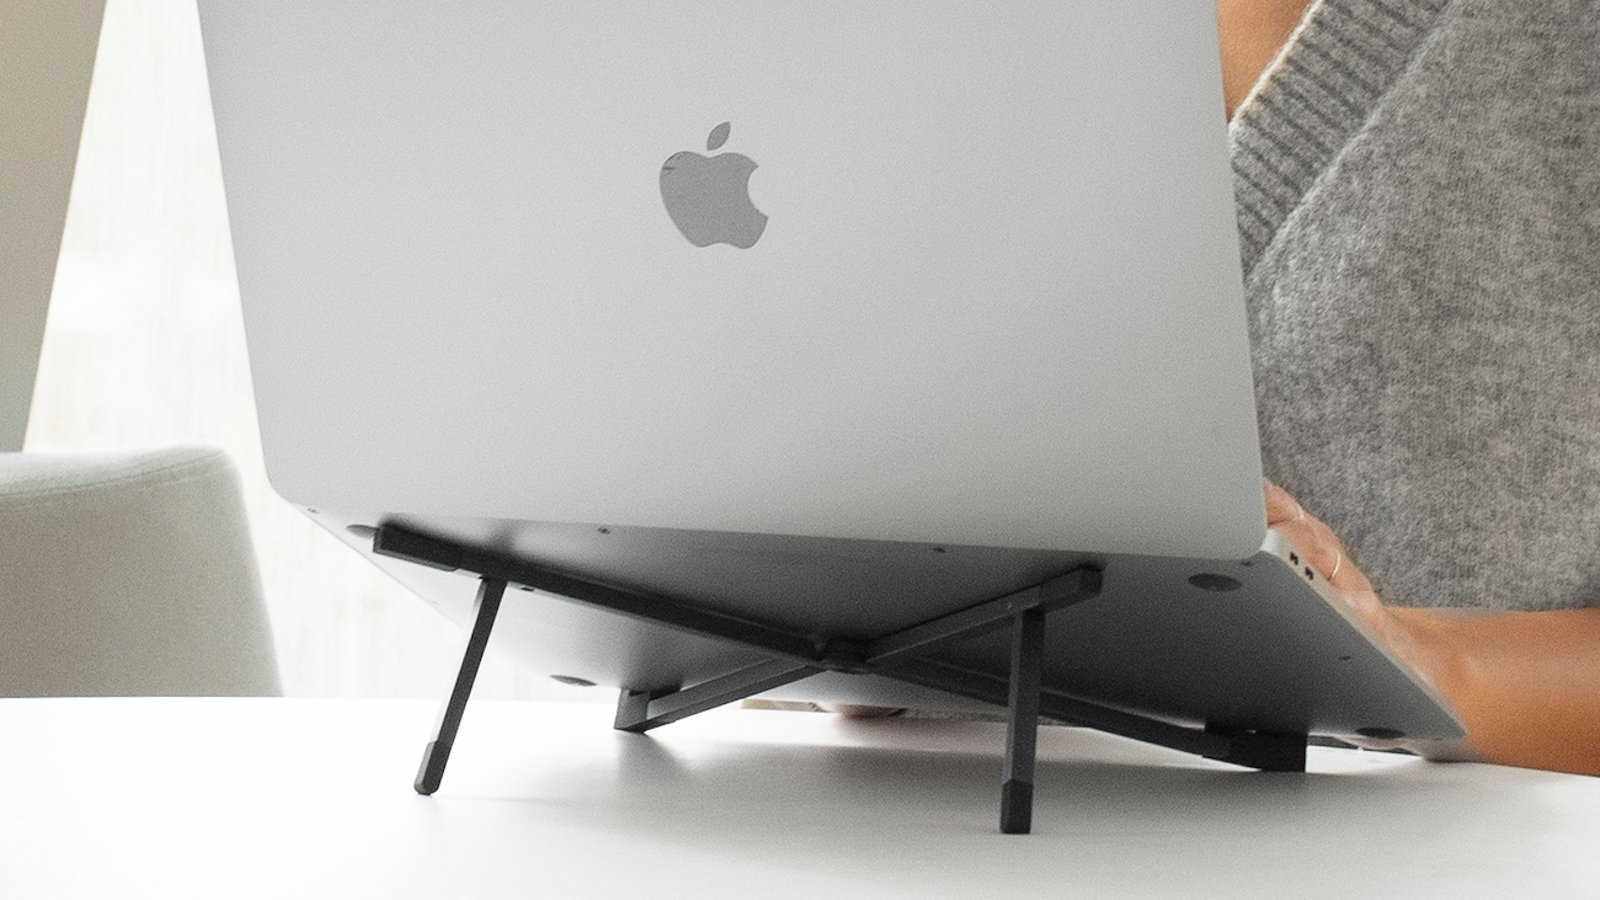 Native Union Fold Laptop Stand offers an optimized 15° viewing angle and improved posture